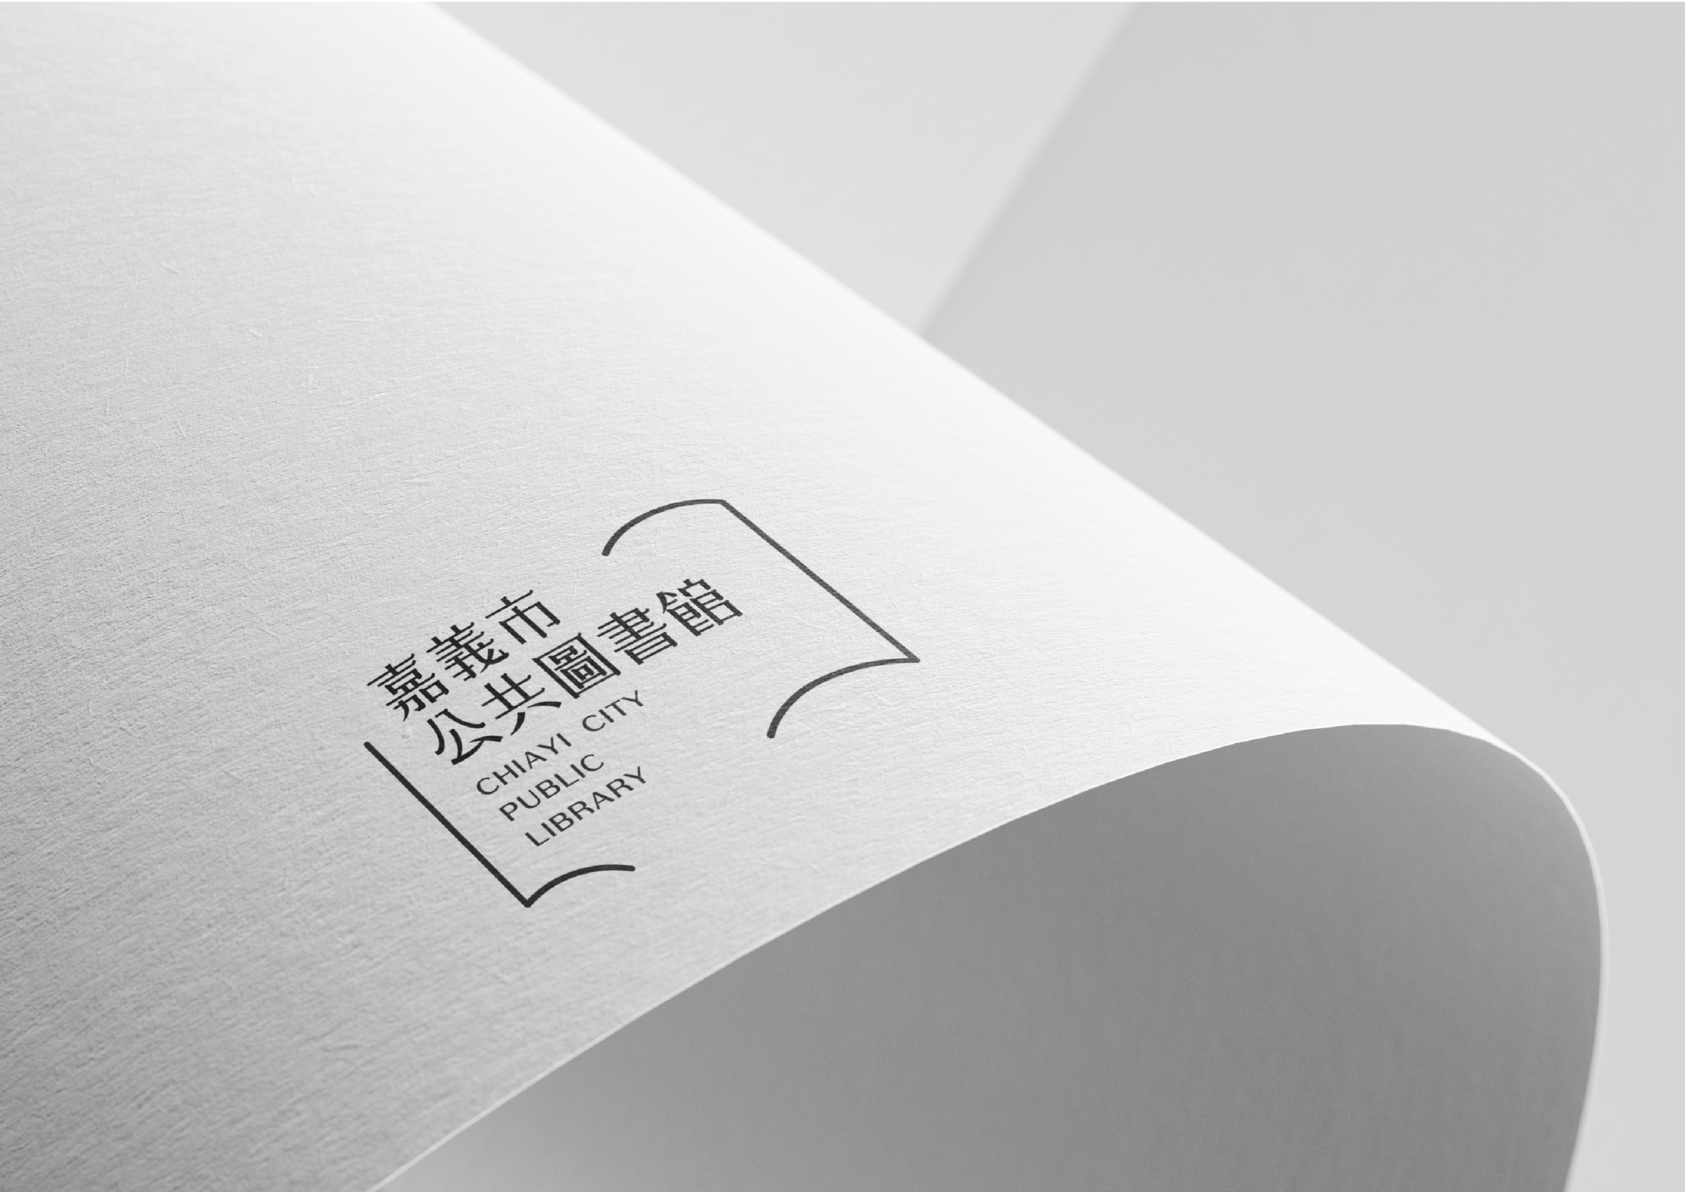 Chiayi City Public Library Corporate Identity System-1